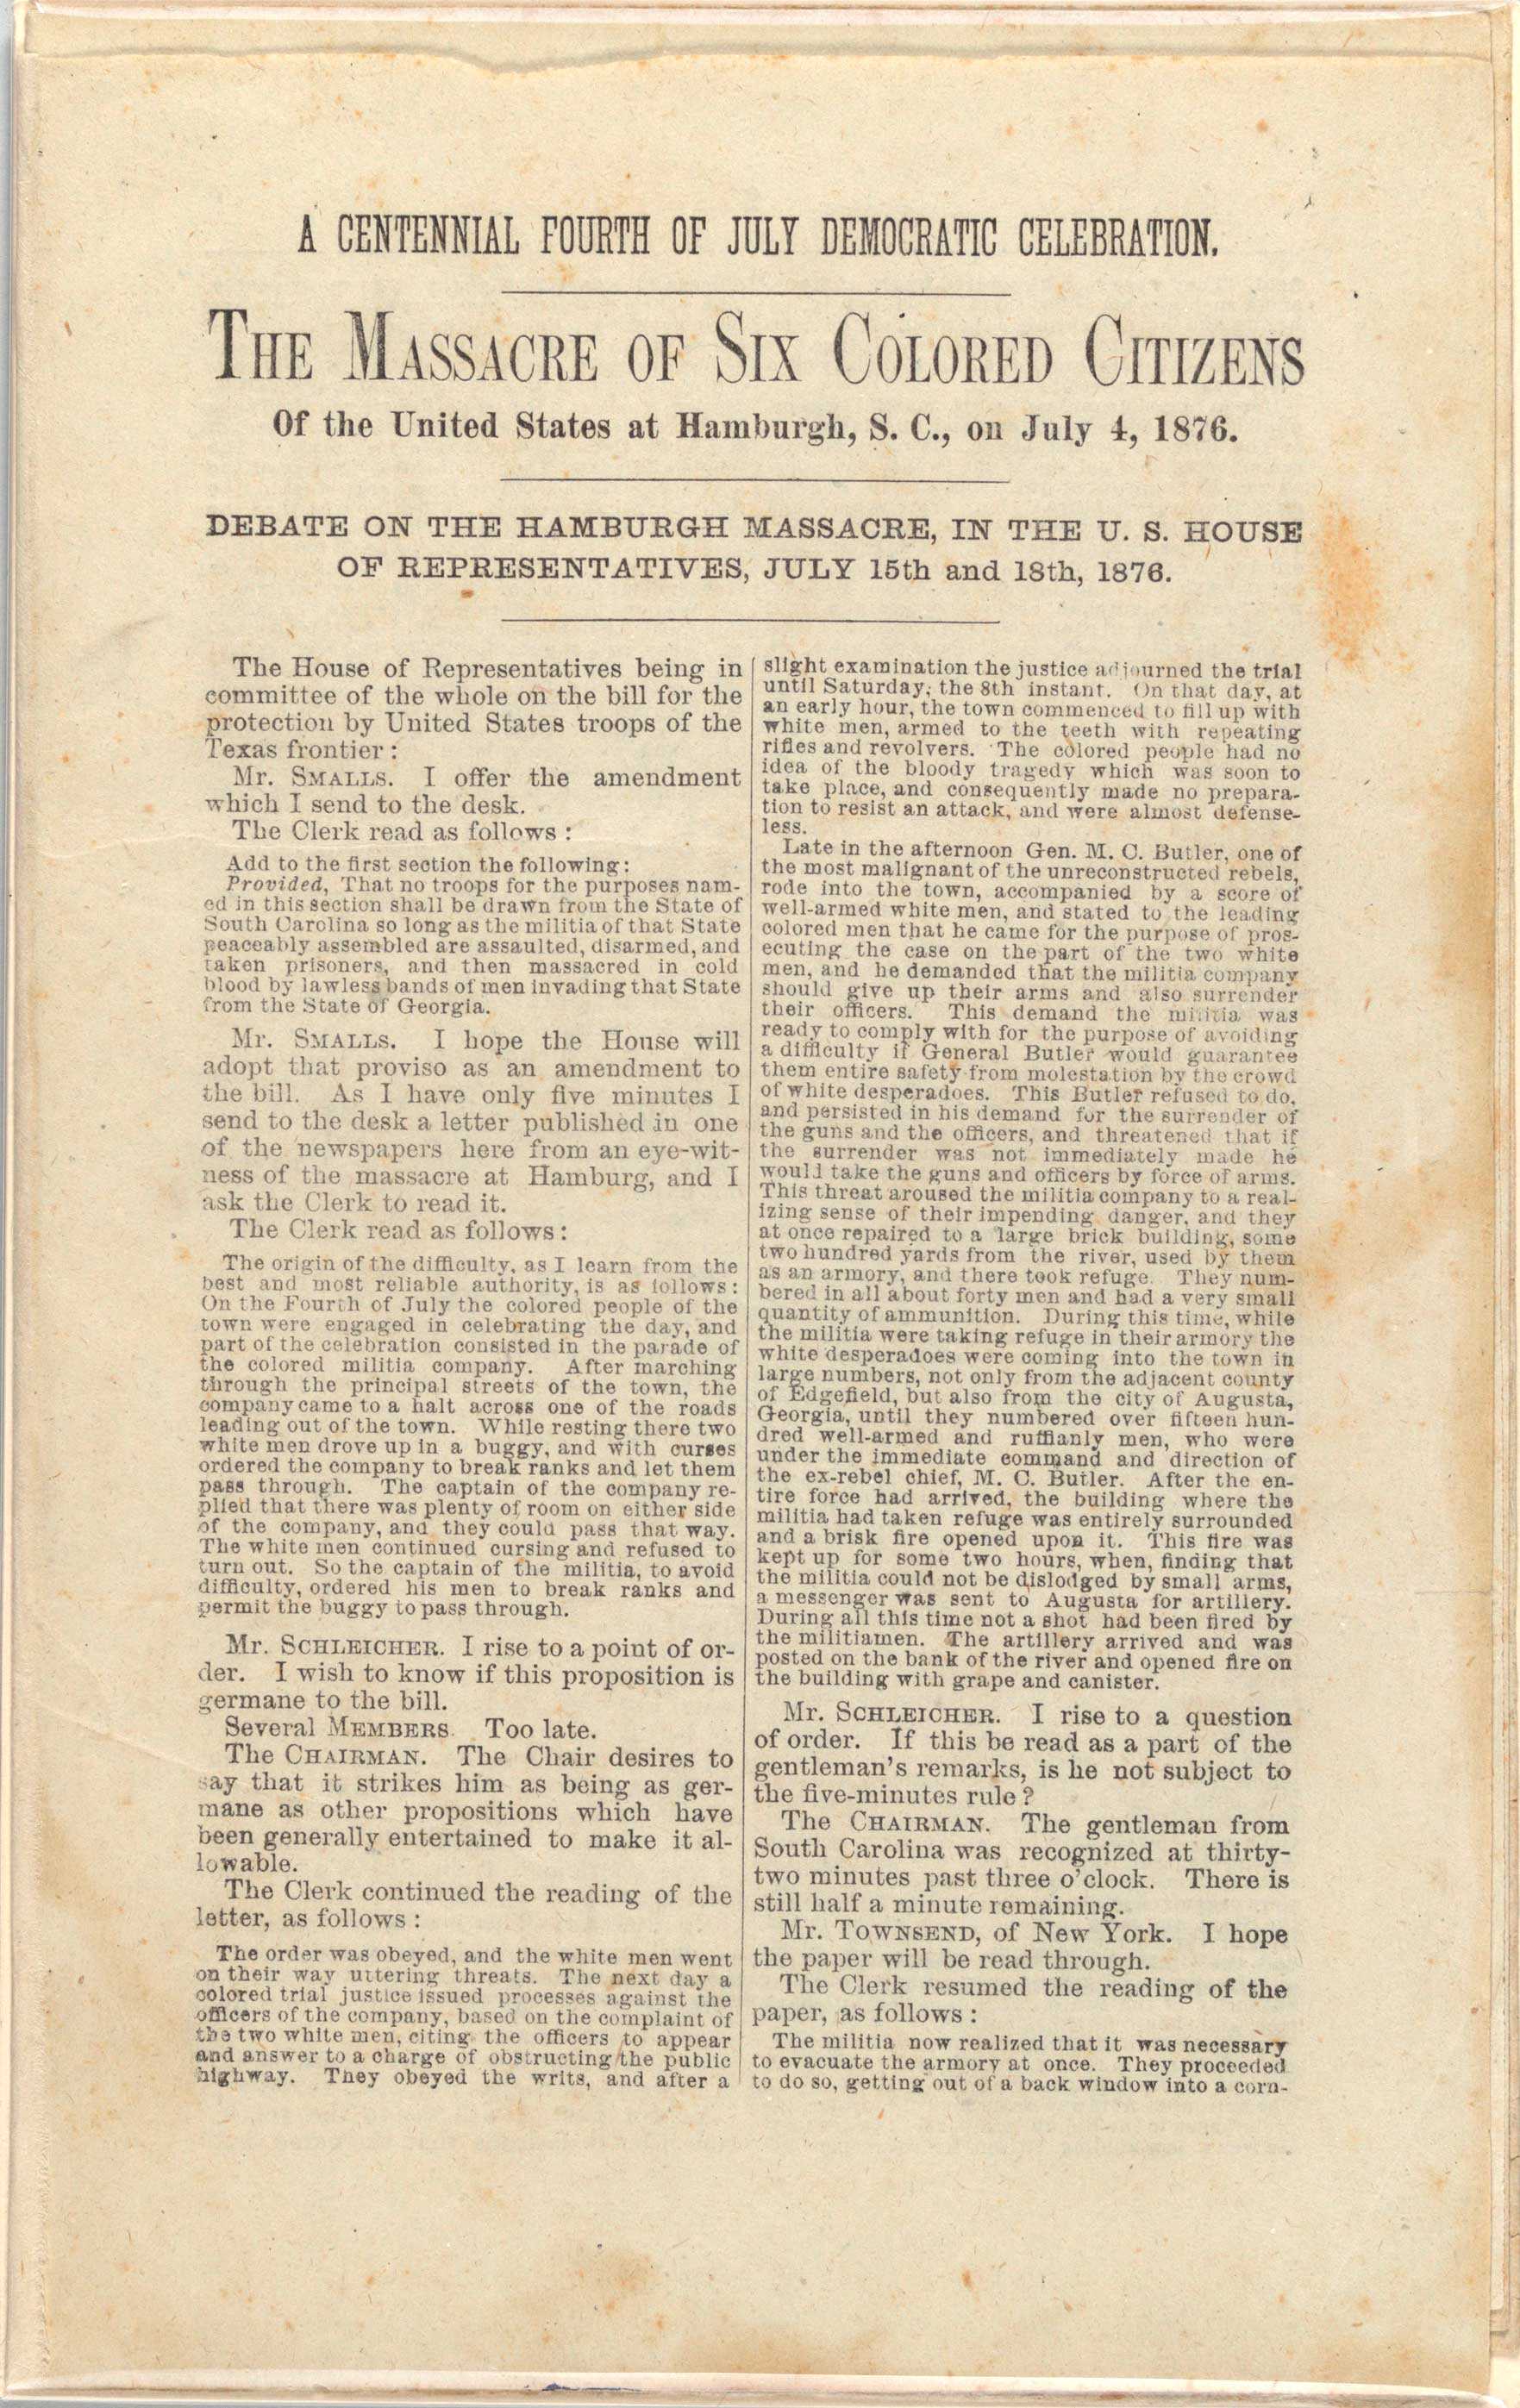 News article that outlines the Massacre of Six Colored Citizens